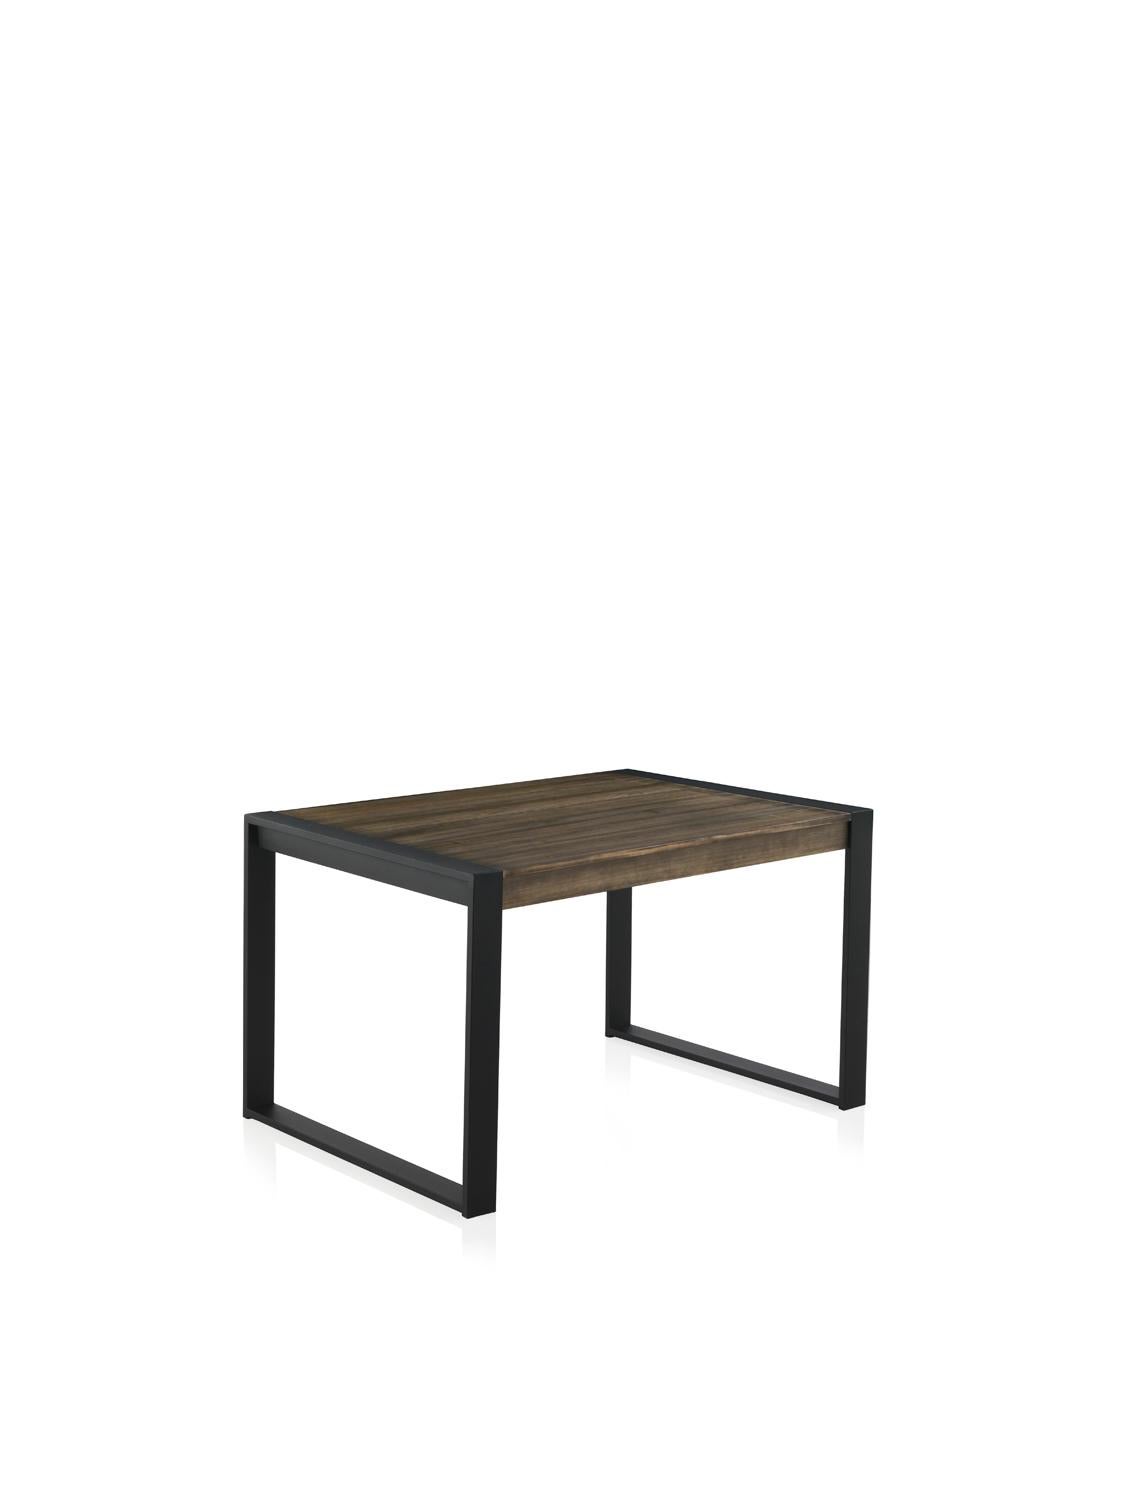 Modern New Extendable Dinning Table for Indoor and Outdoor with Wood Top For Sale